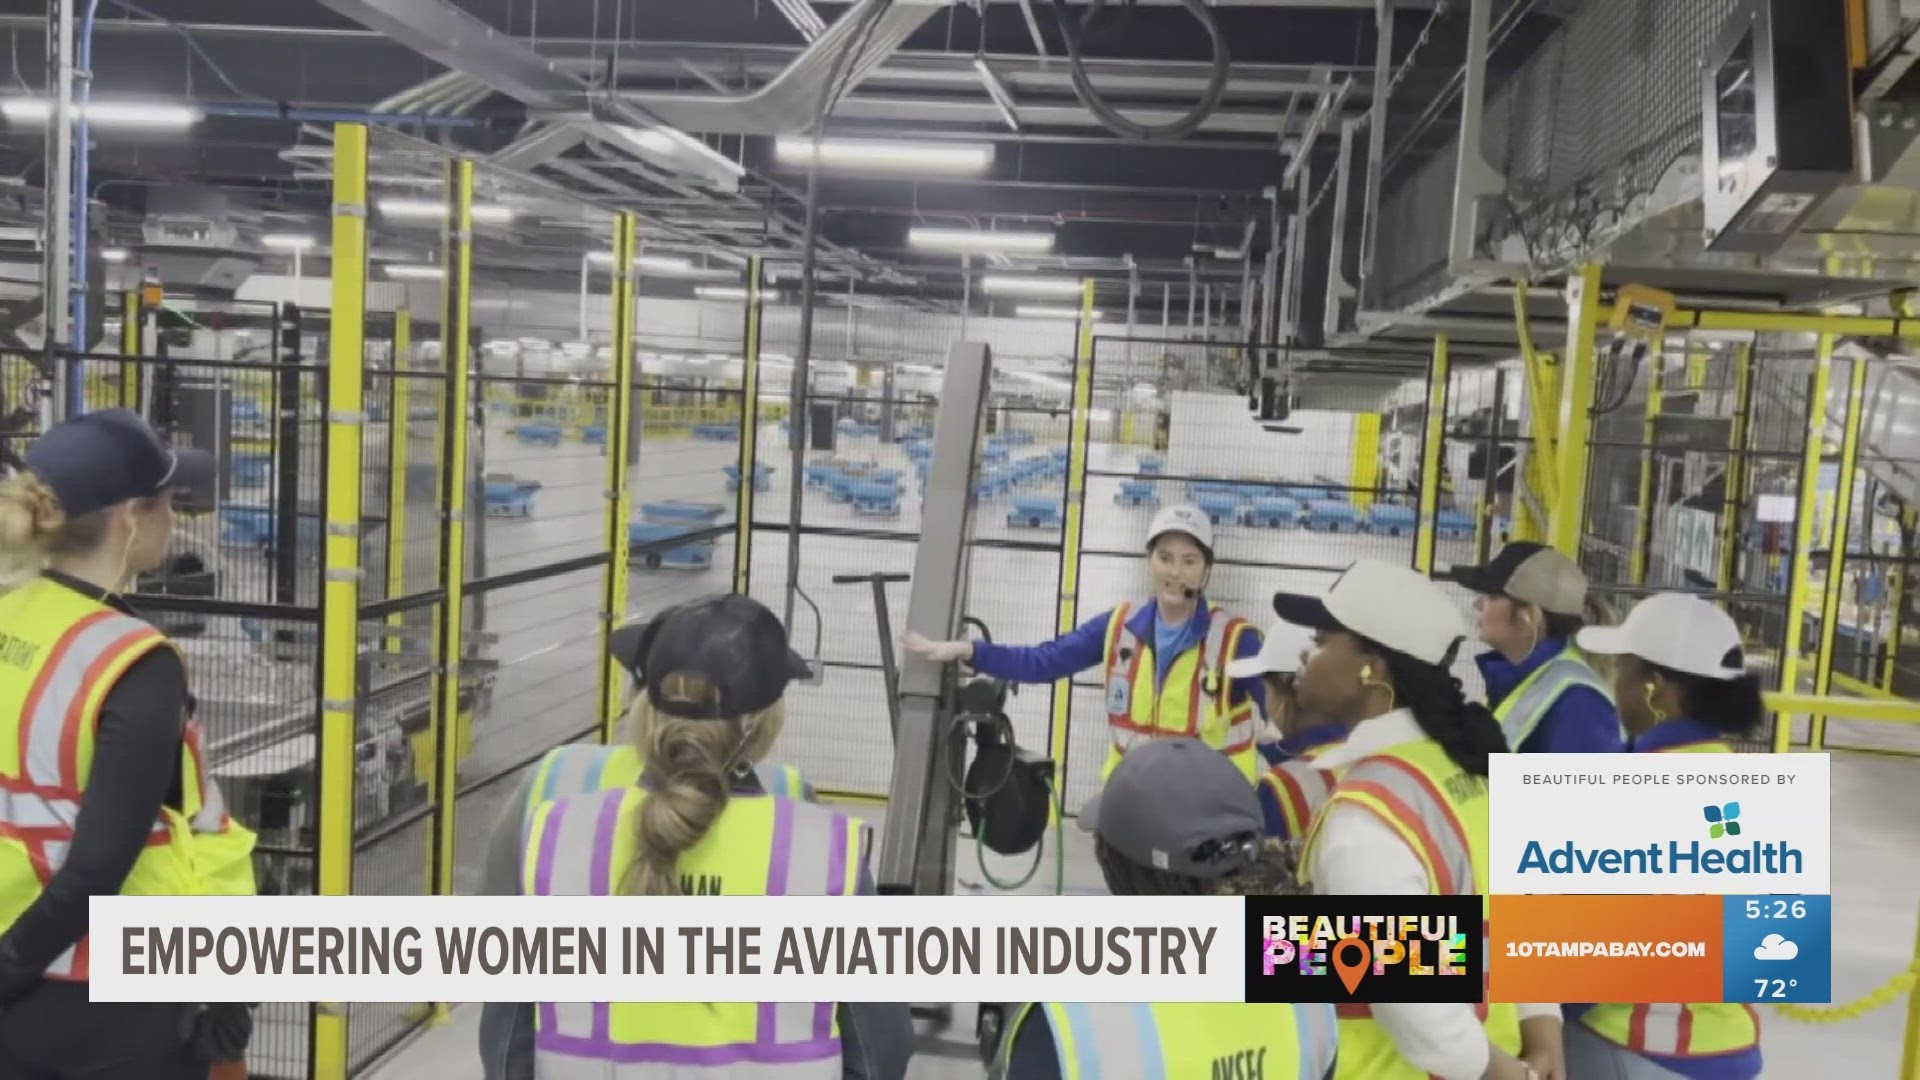 About 20% of the aviation industry are women, but Tori Cox is working to help change that.